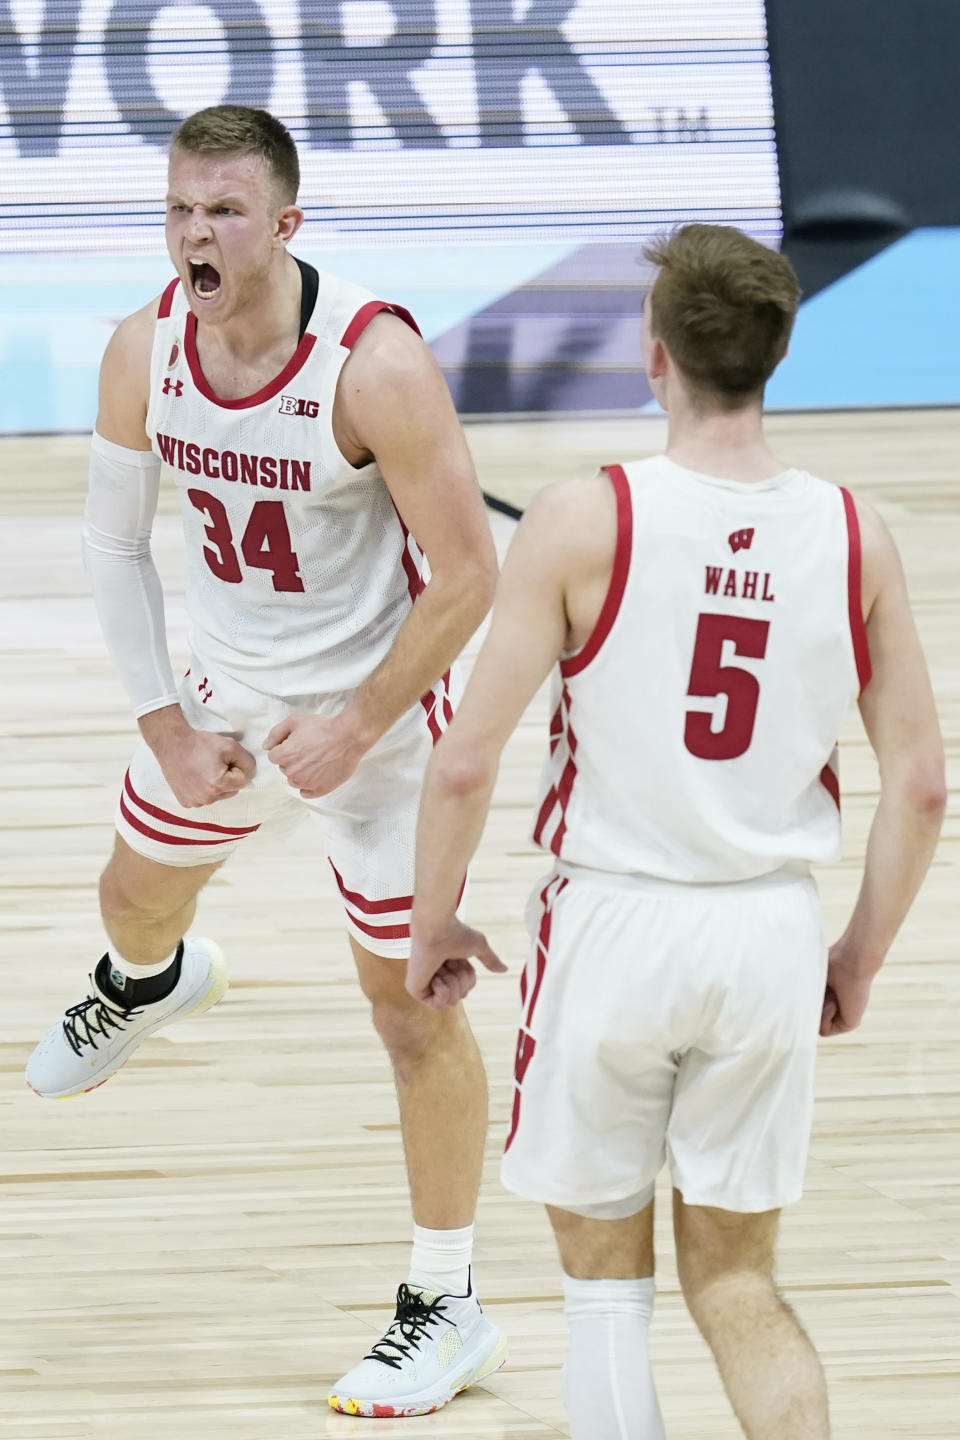 Wisconsin's Brad Davison (34) celebrates with Tyler Wahl (5) after Davison hit s shot during the second half of an NCAA college basketball game against Penn State at the Big Ten Conference tournament, Thursday, March 11, 2021, in Indianapolis. (AP Photo/Darron Cummings)